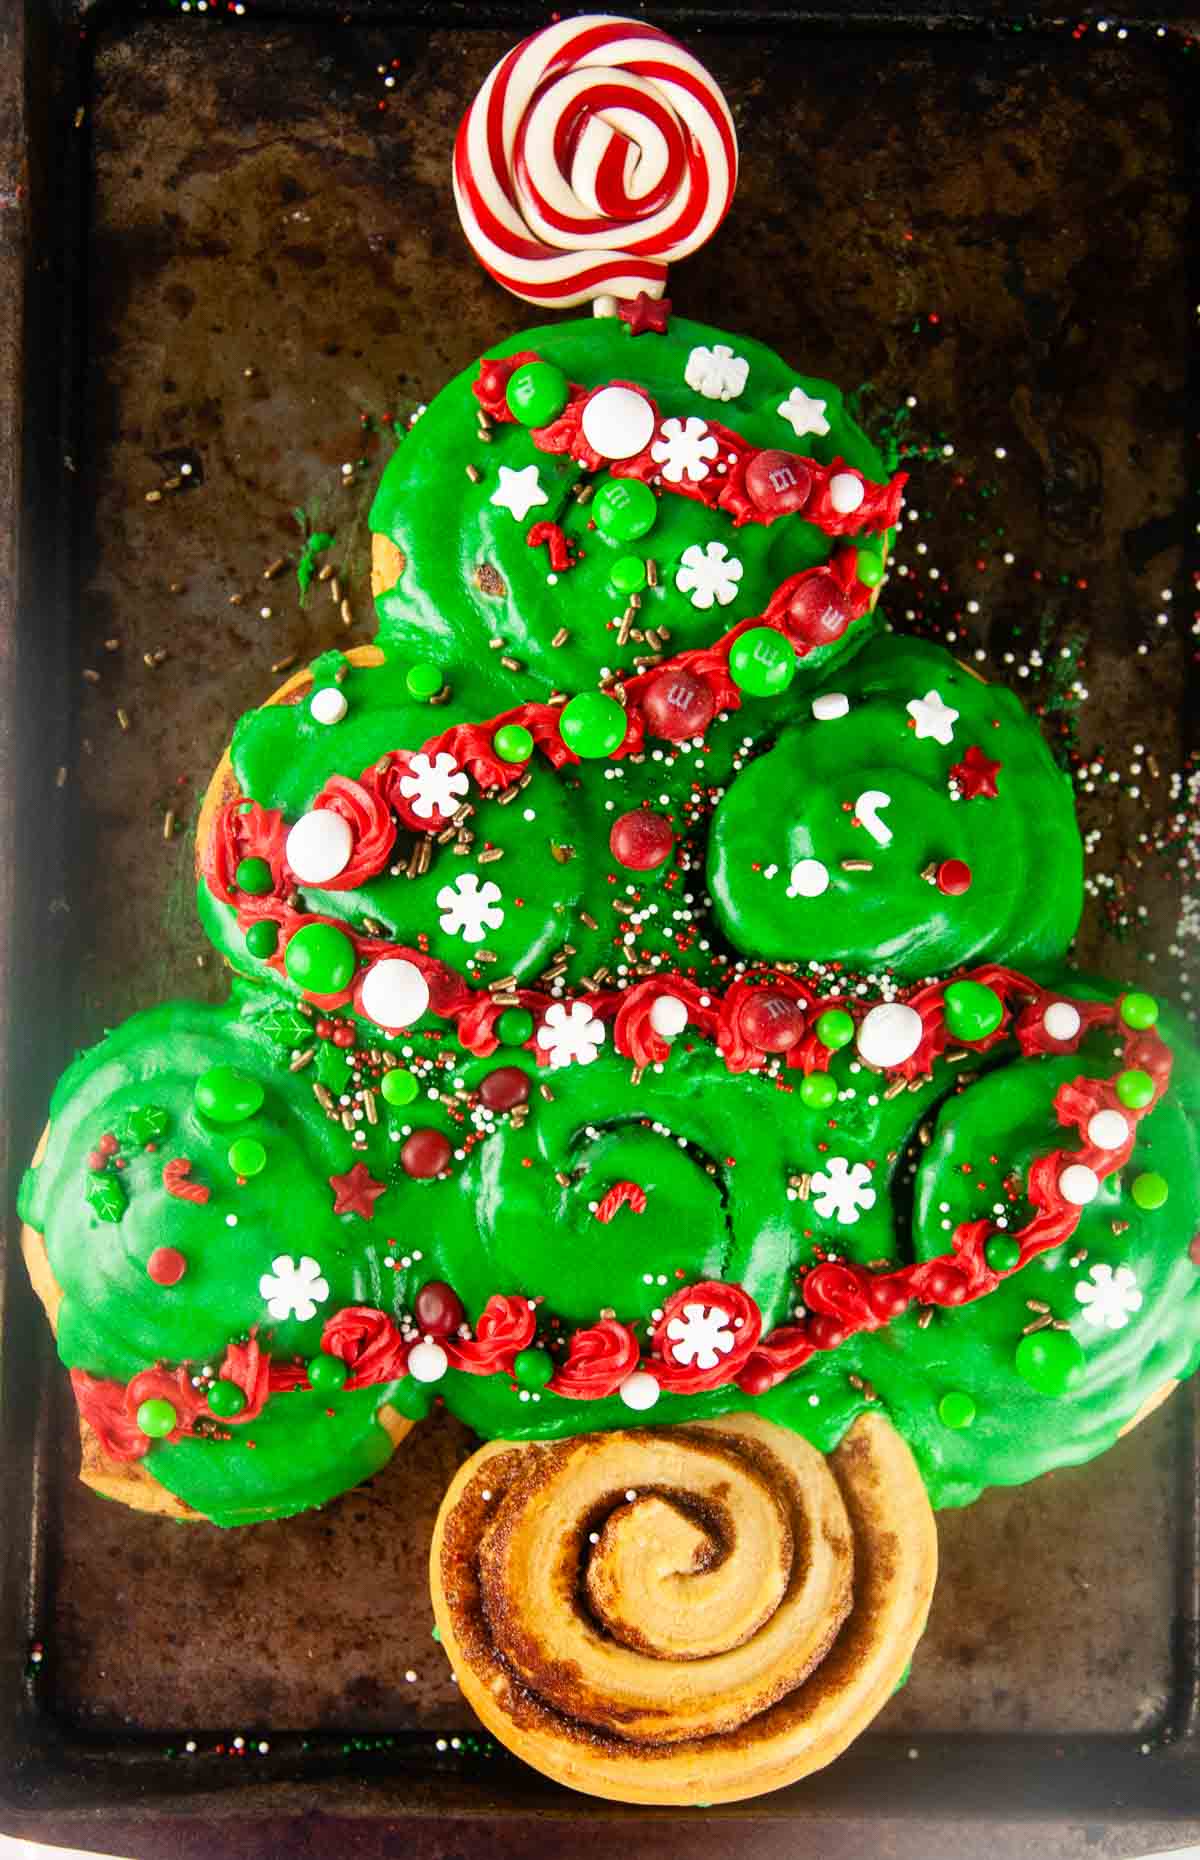 Decorated with candy, sprinkles and red frosting garland, Easy Cinnamon Roll Christmas Tree for Christmas Morning makes a fun, kid friendly Christmas breakfast.